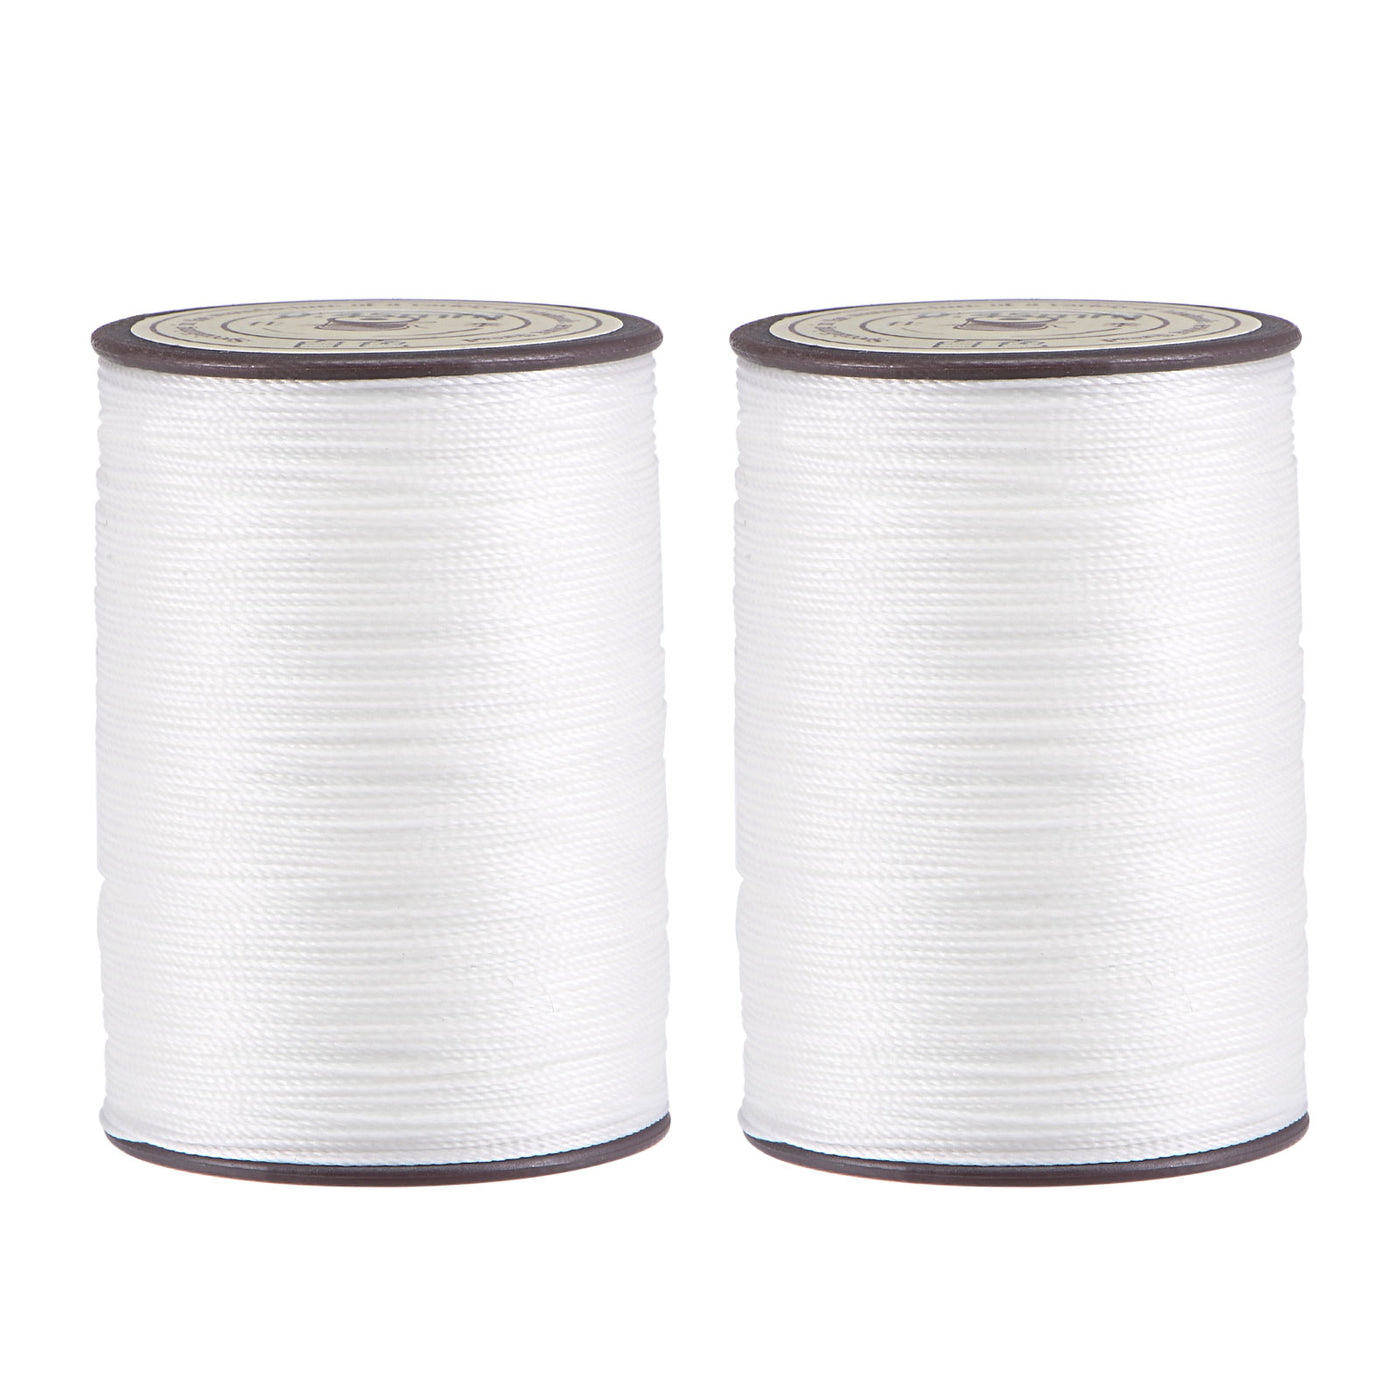 Uxcell Uxcell 2pcs Thin Waxed Thread 175 Yards 0.45mm Dia Polyester Wax-Coated Cord White